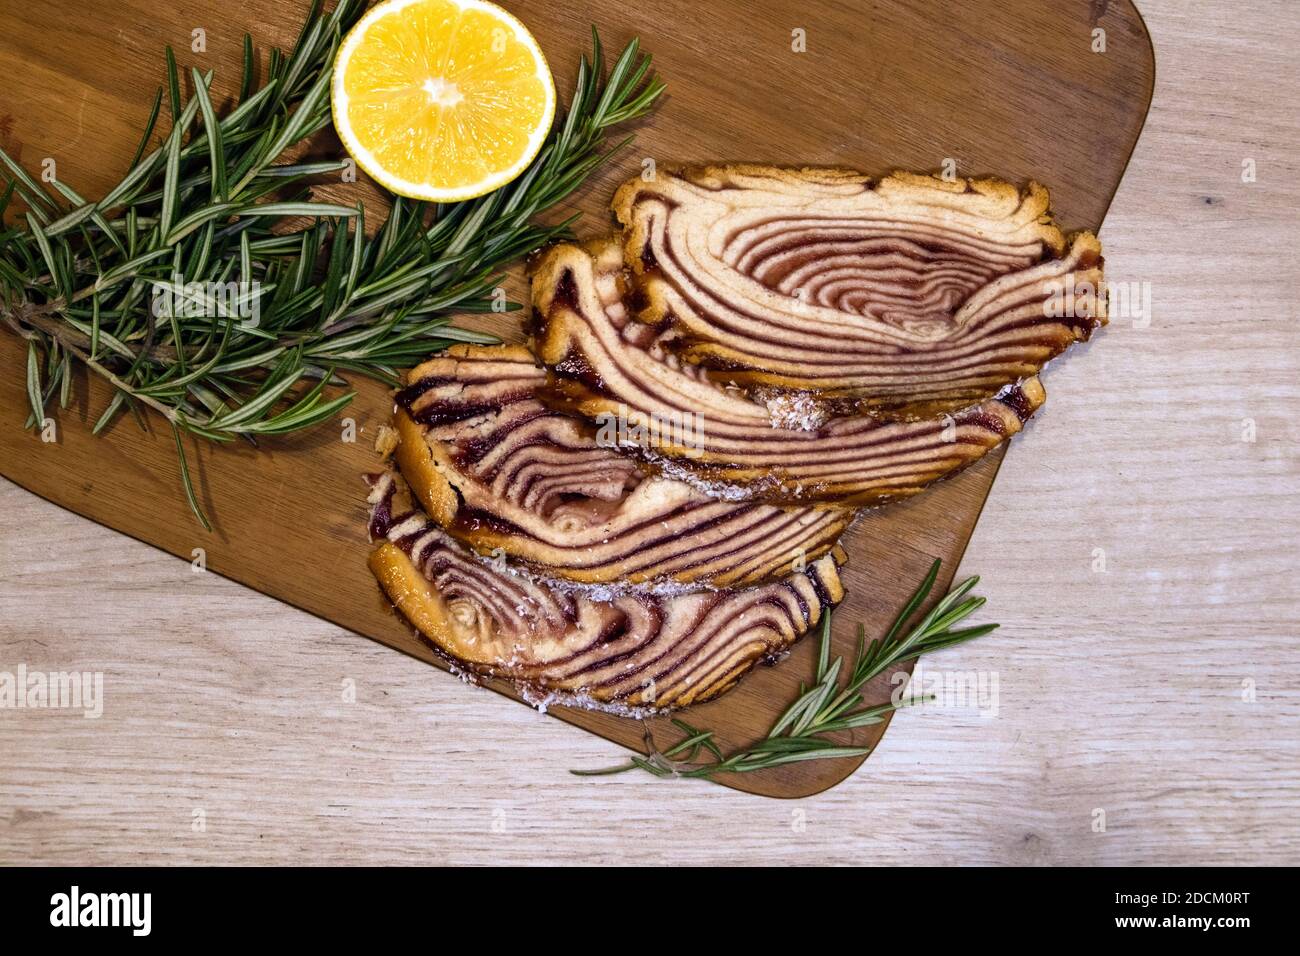 Sweet dessert served on a wooden board with sliced pastry roll and lemon half decorated with rosemary sprigs Stock Photo